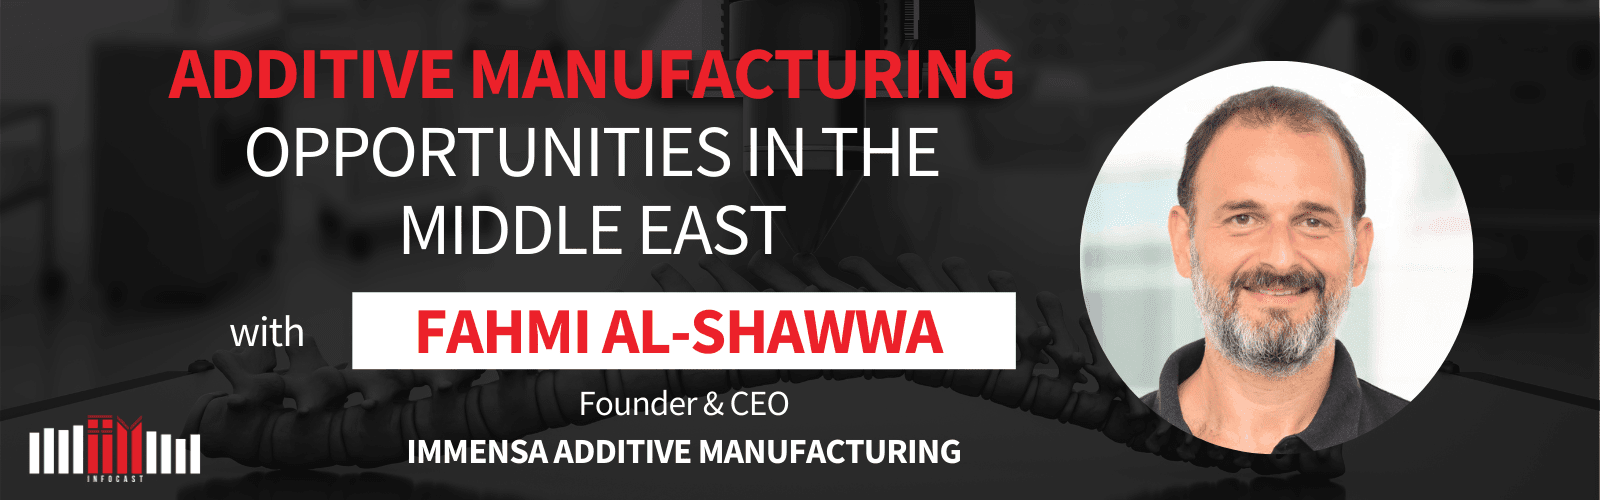 Additive Manufacturing Opportunities in the Middle East